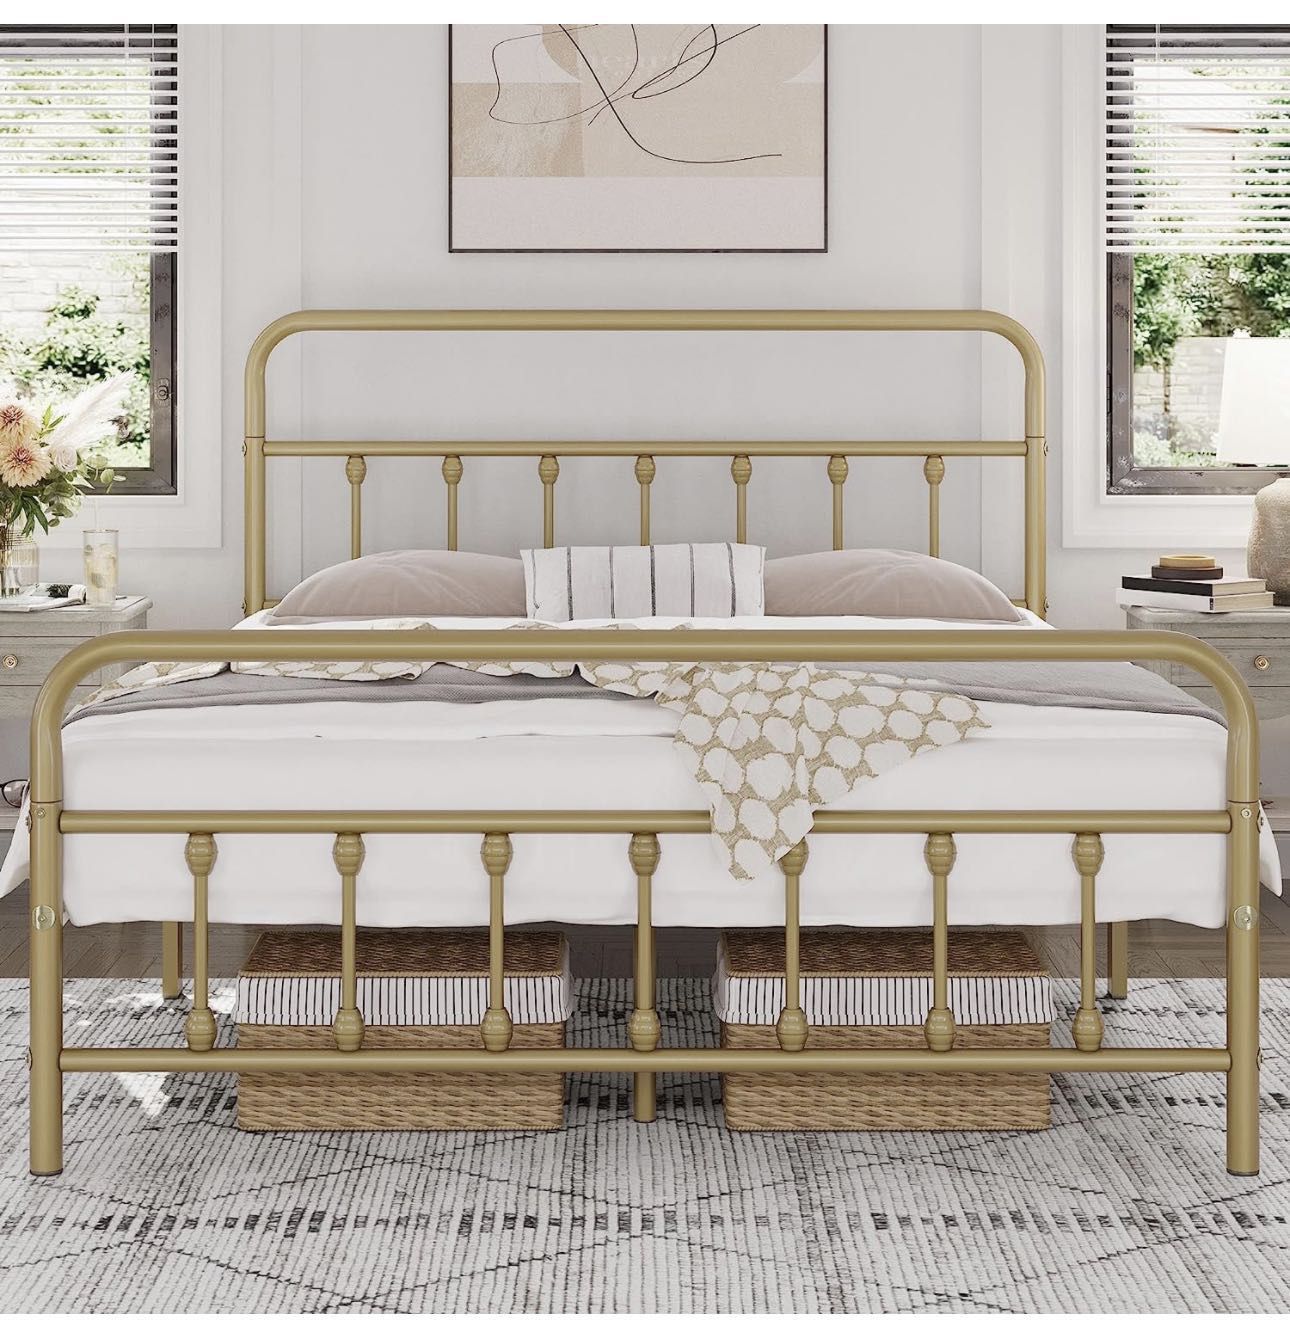 Classic Metal Platform Bed Frame Mattress Foundation with Victorian Style Iron-Art Headboard/Footboard/Under Bed Storage No Box Spring Needed Full Siz